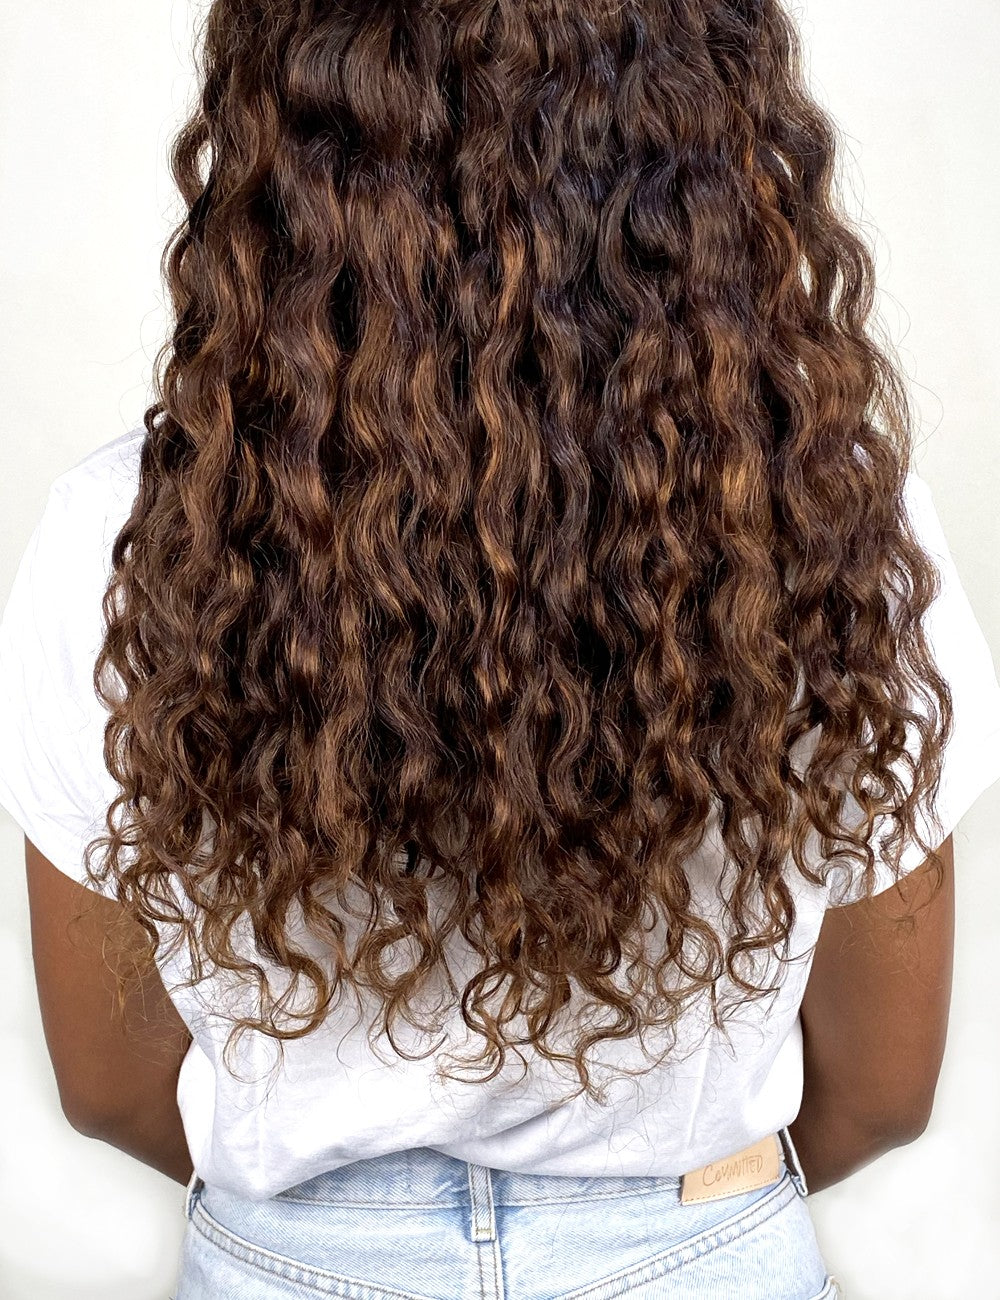 Natural curly Clip in Golden brown